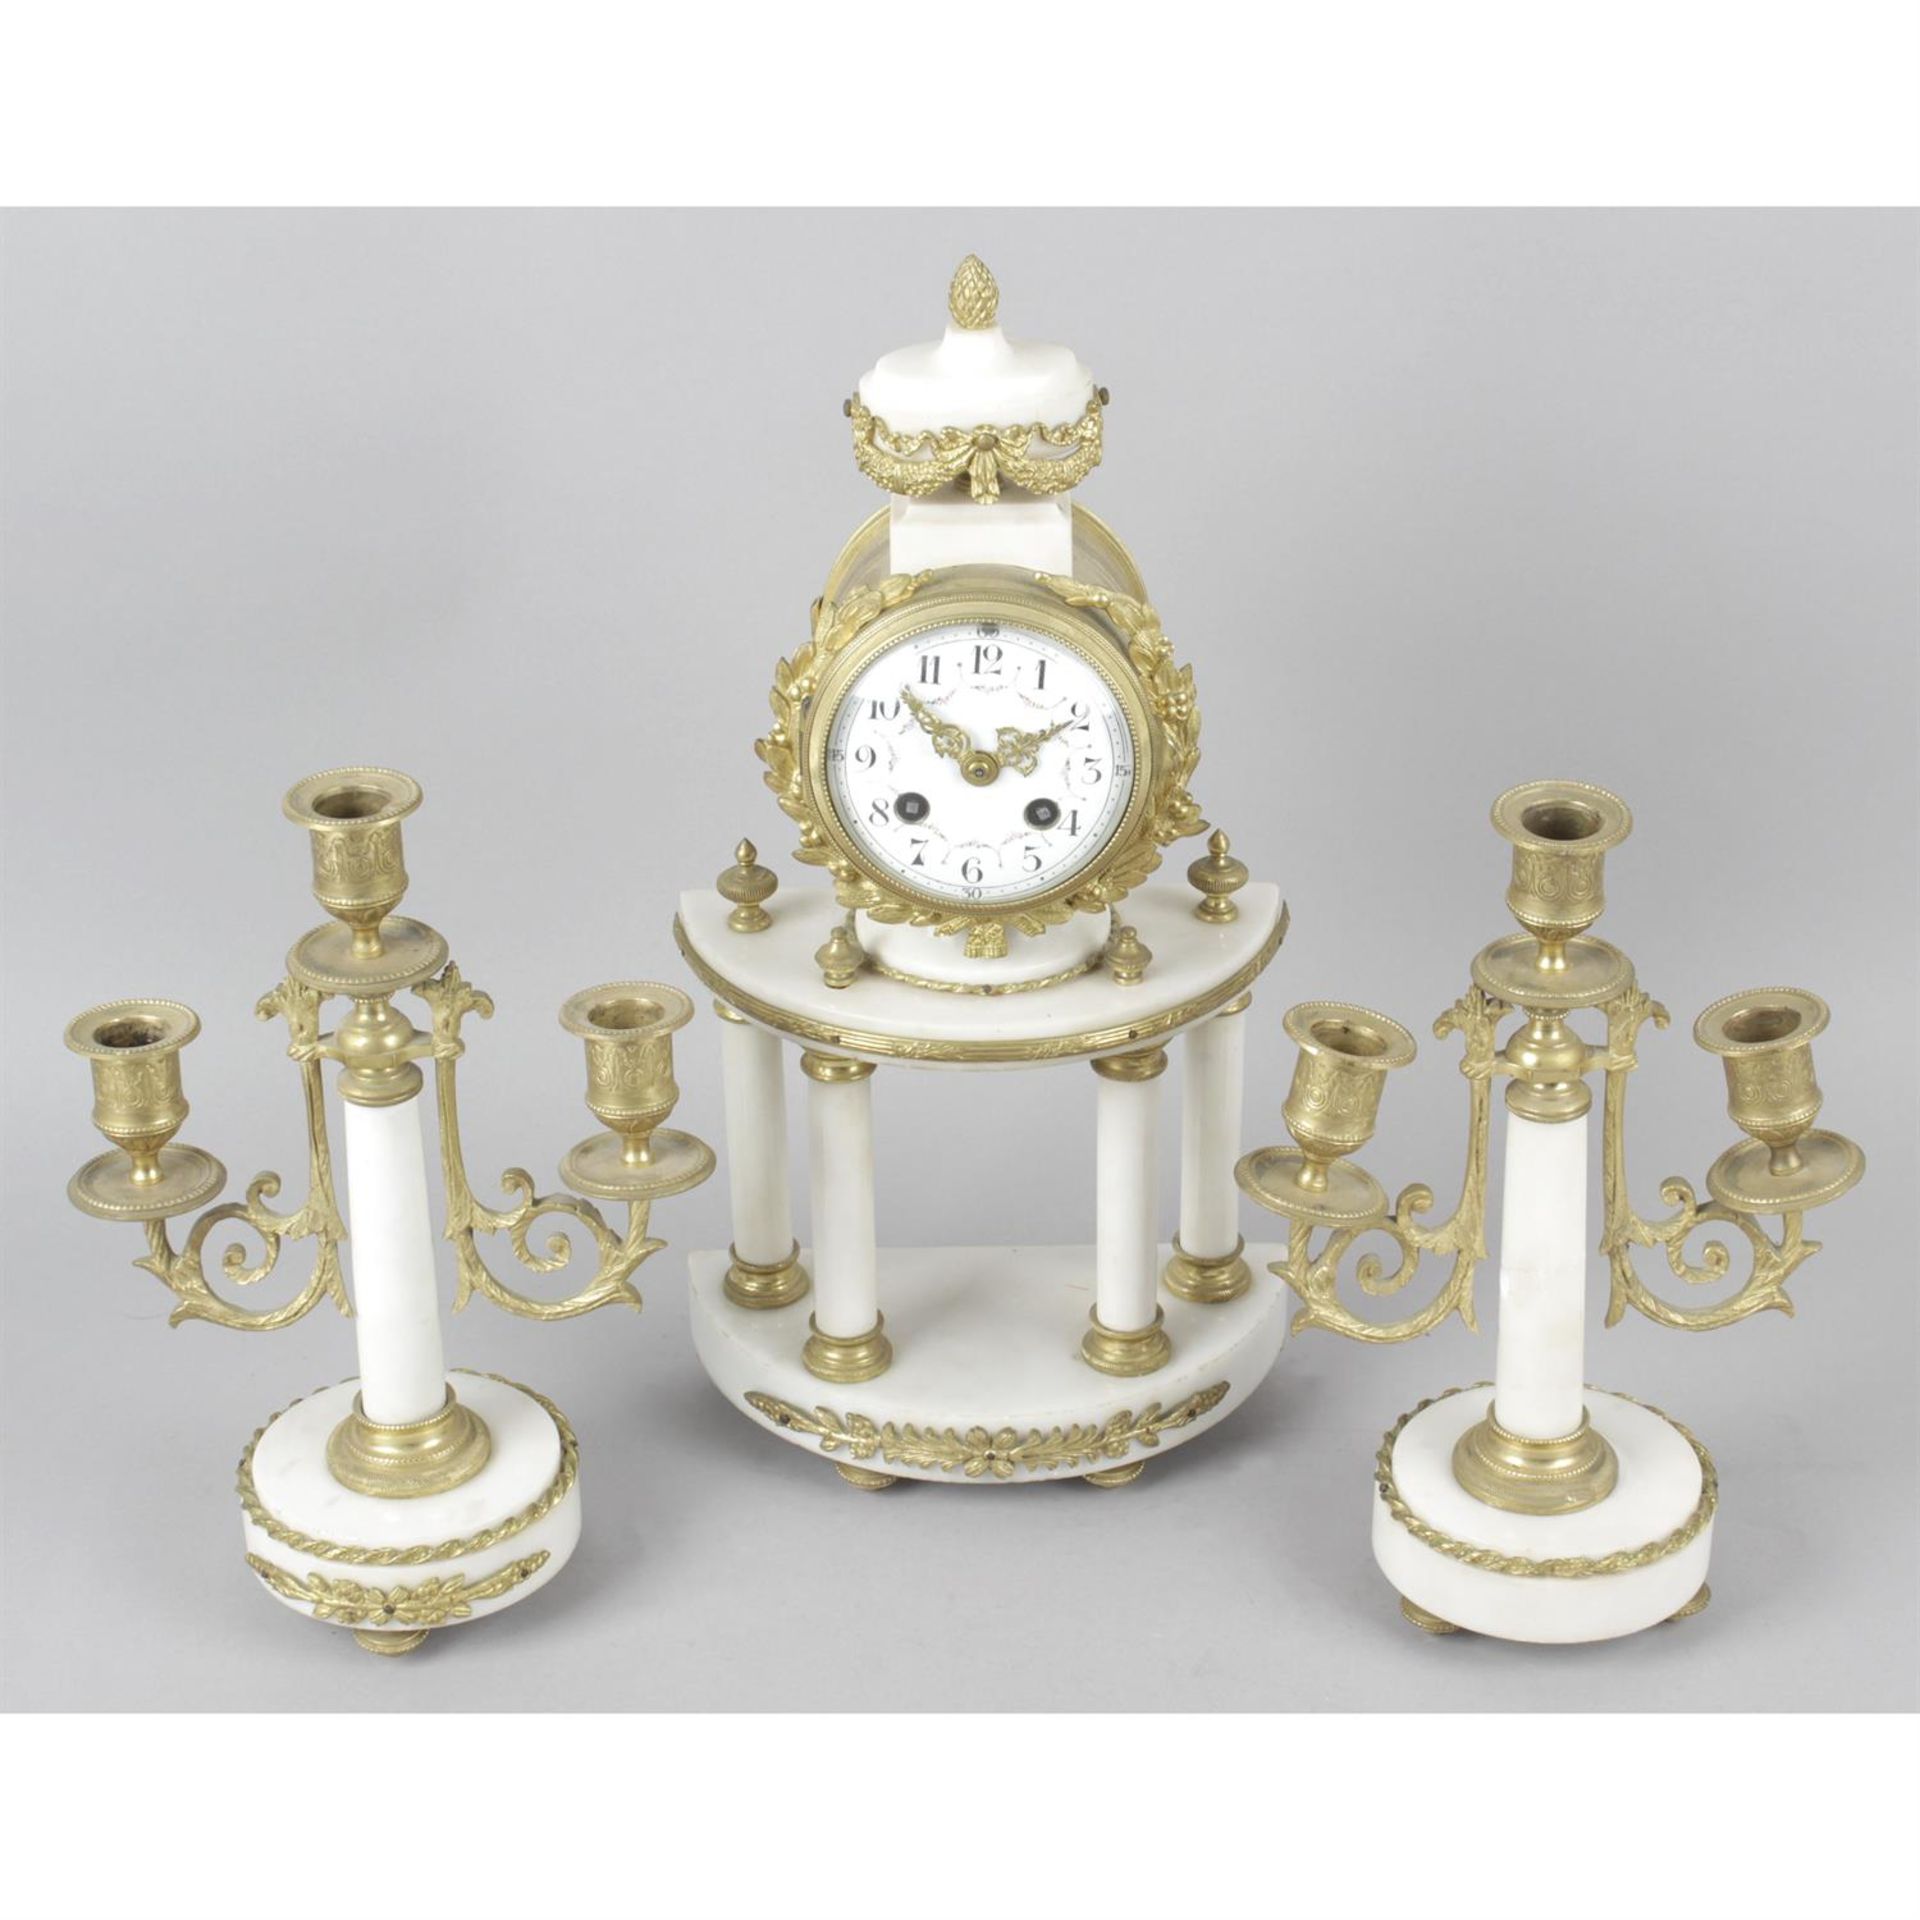 An early 20th century French garniture.